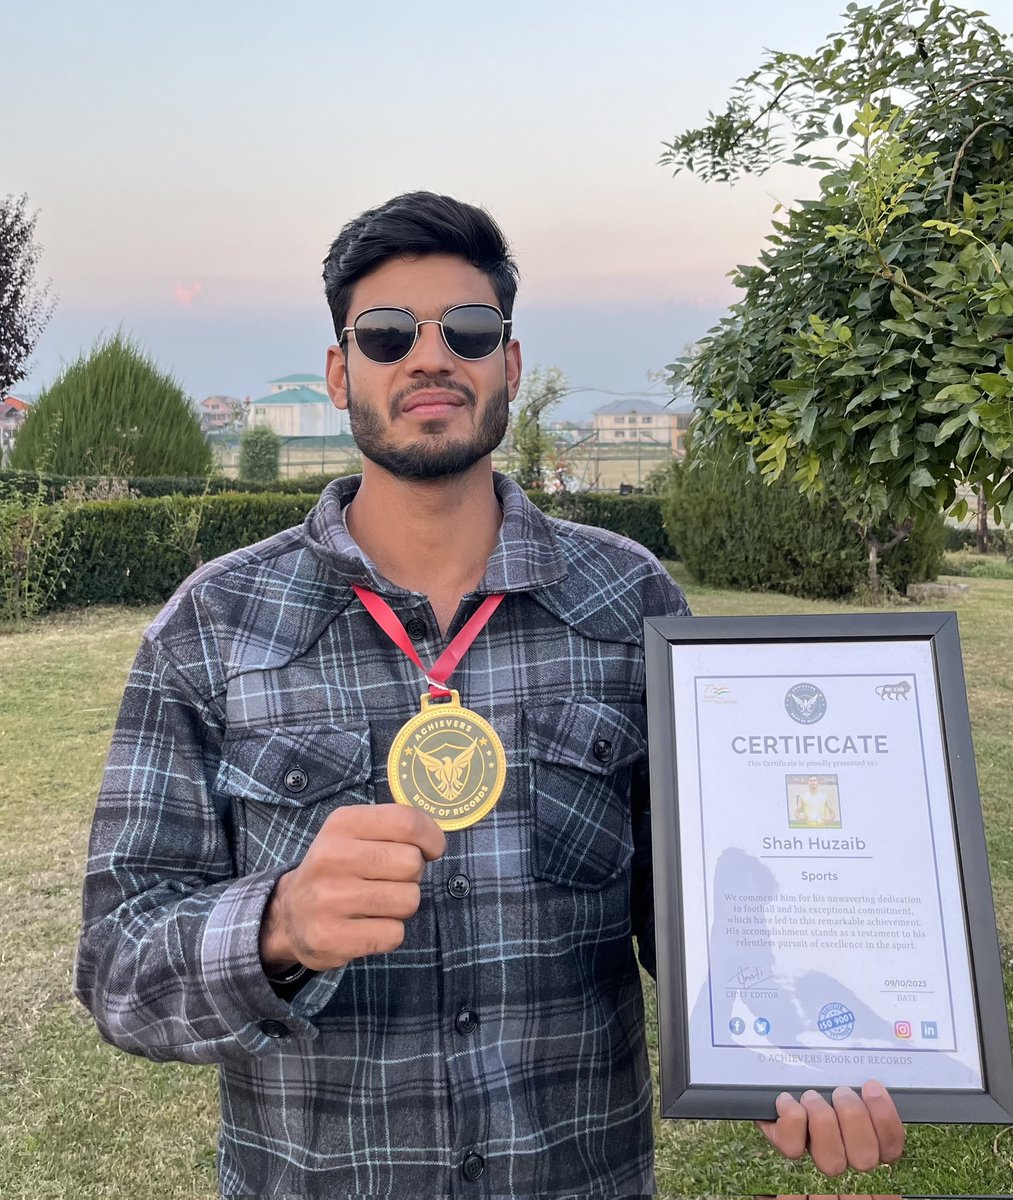 I have worked very hard for this raise. Happy to be recognized by ‘ACHEIVERS BOOK OF RECORDS’ for my Achievements. I am very happy to have it 😇. Thank you everyone for your love and Support ♥️